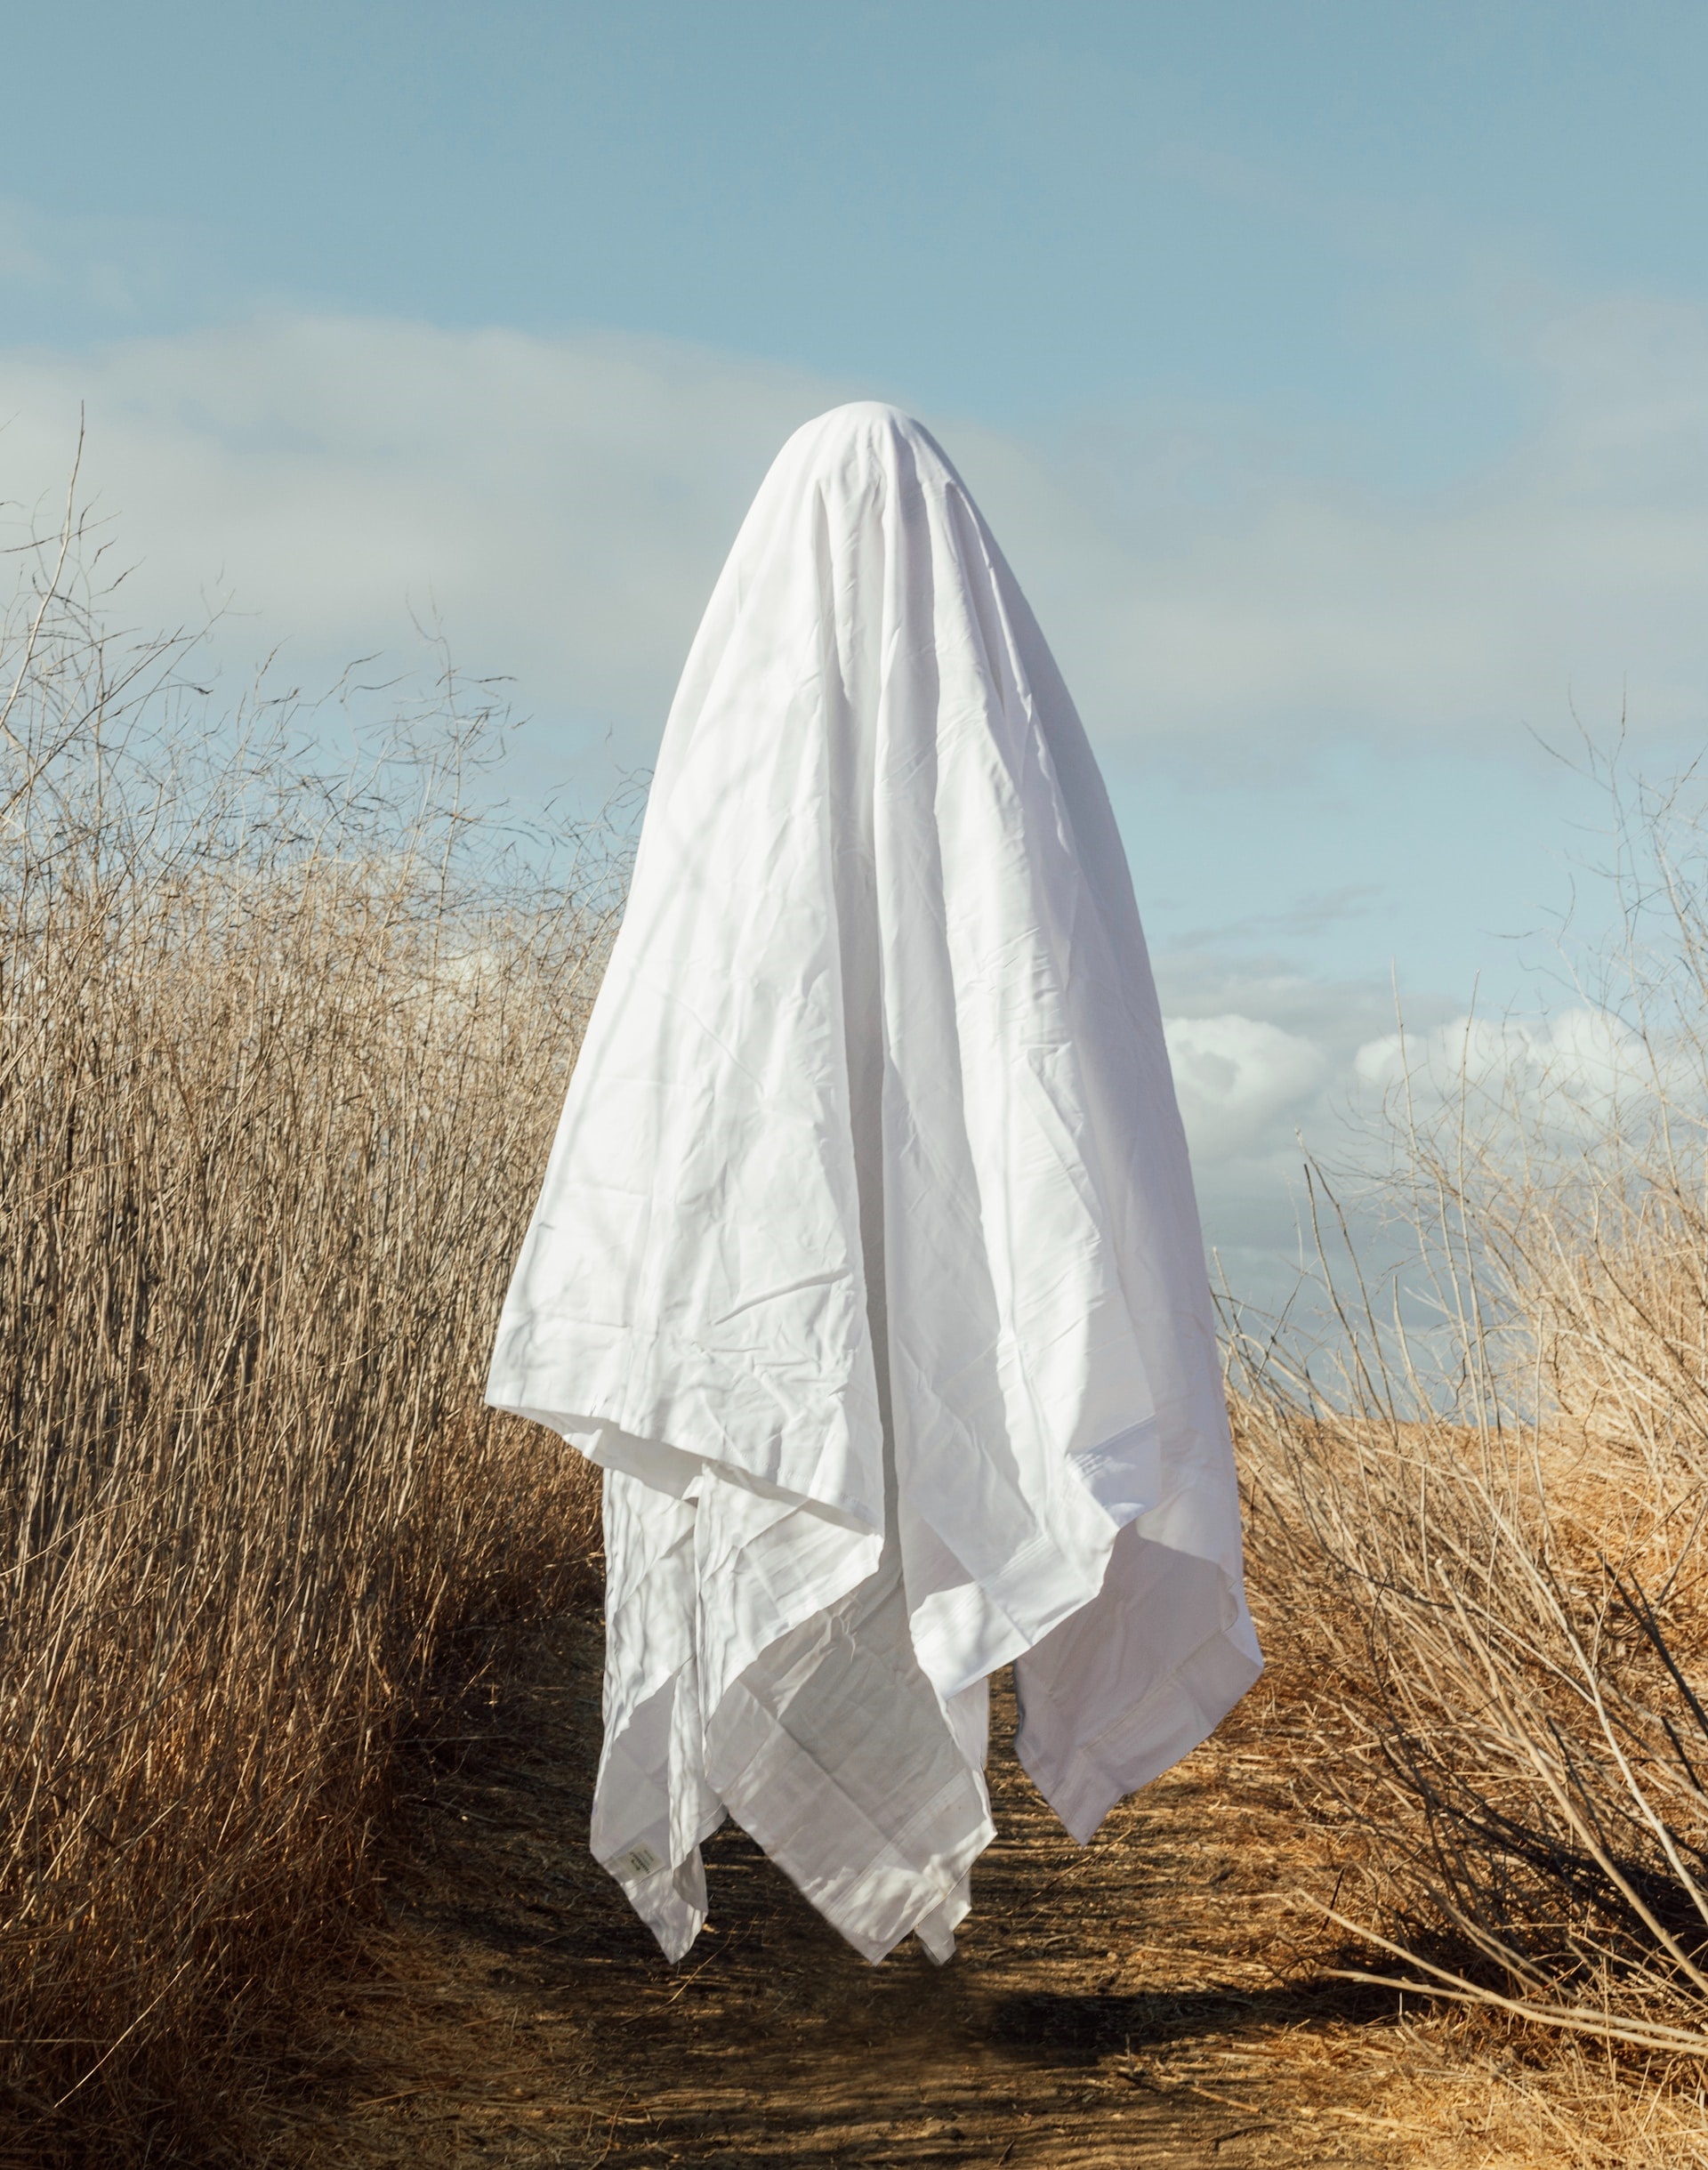 Common questions about ghostwriting and ghostwriters